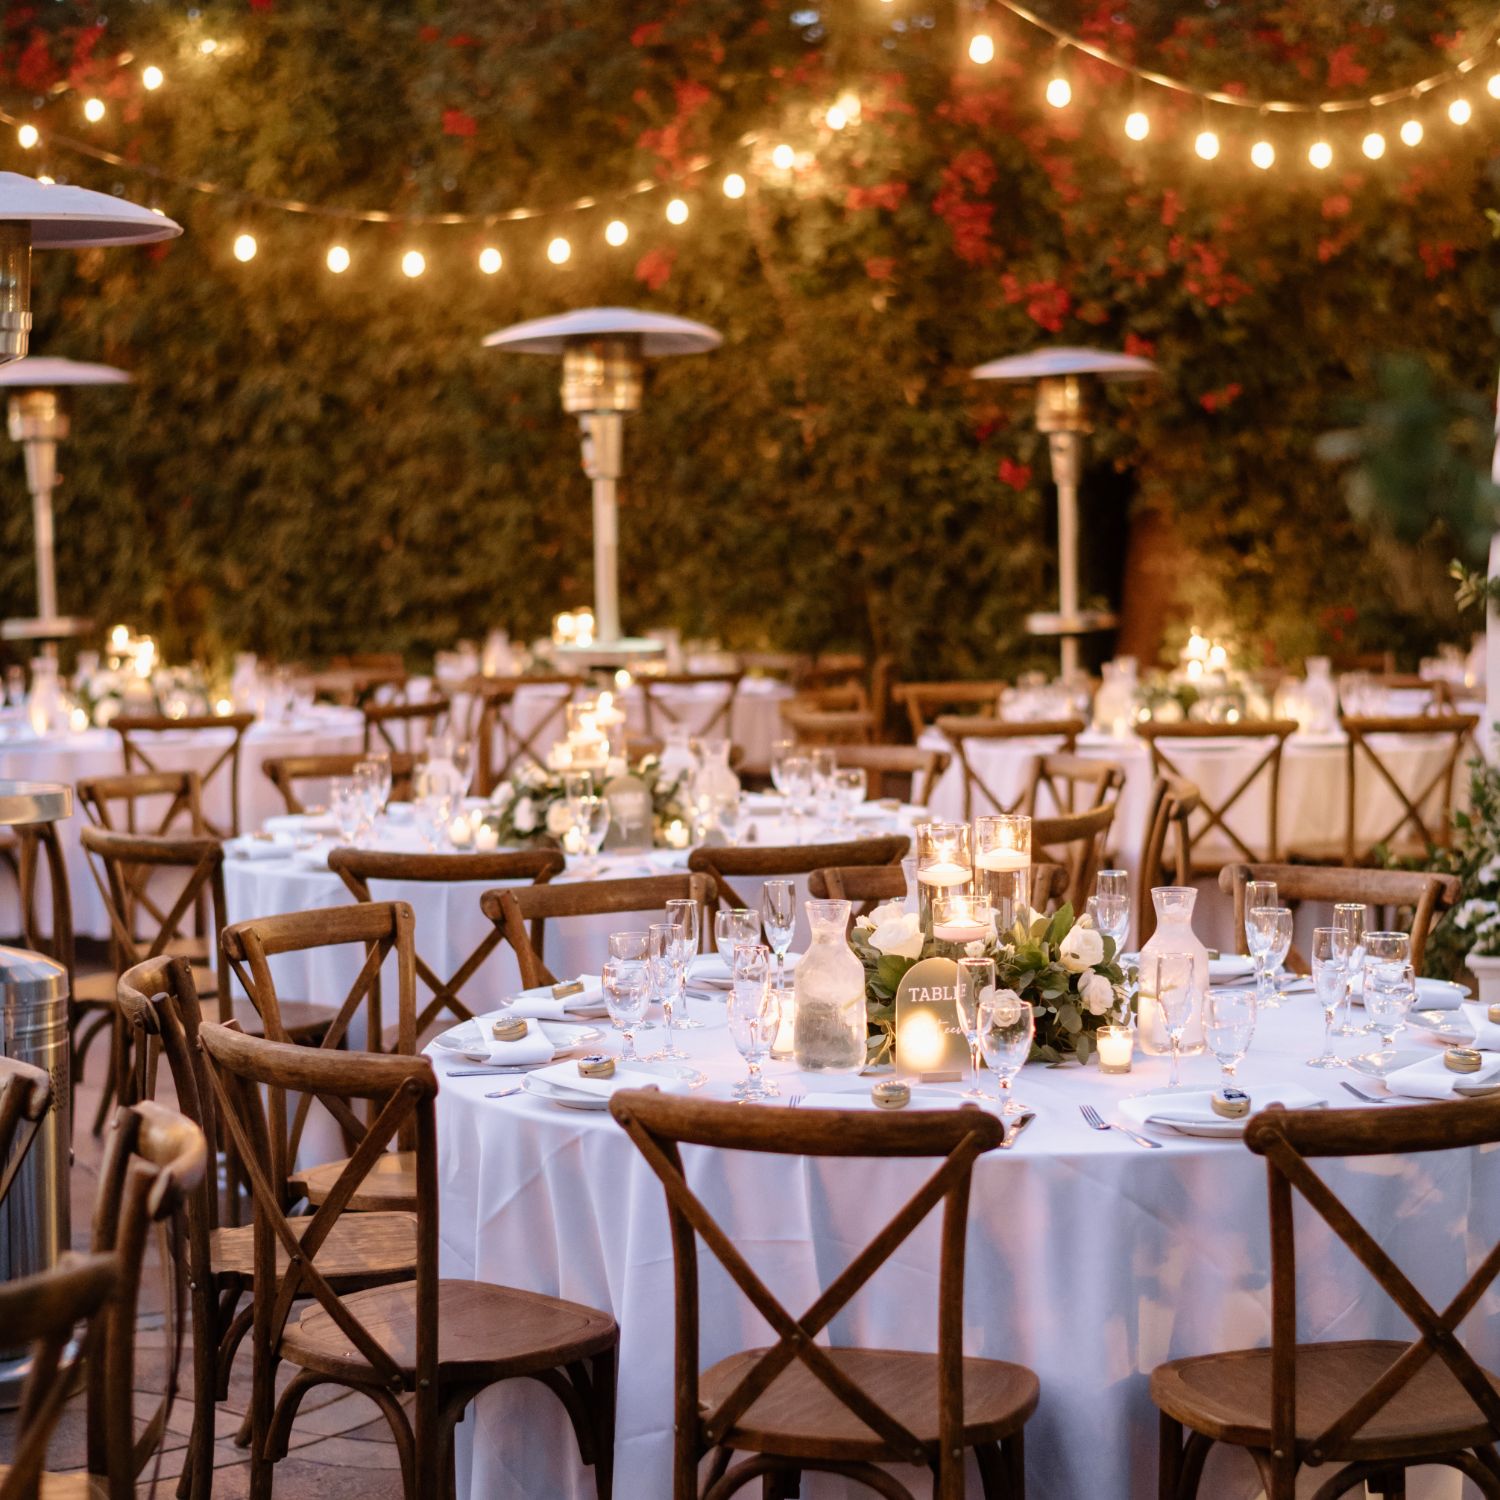 An outdoor wedding reception area with round, white tables and hanging lights